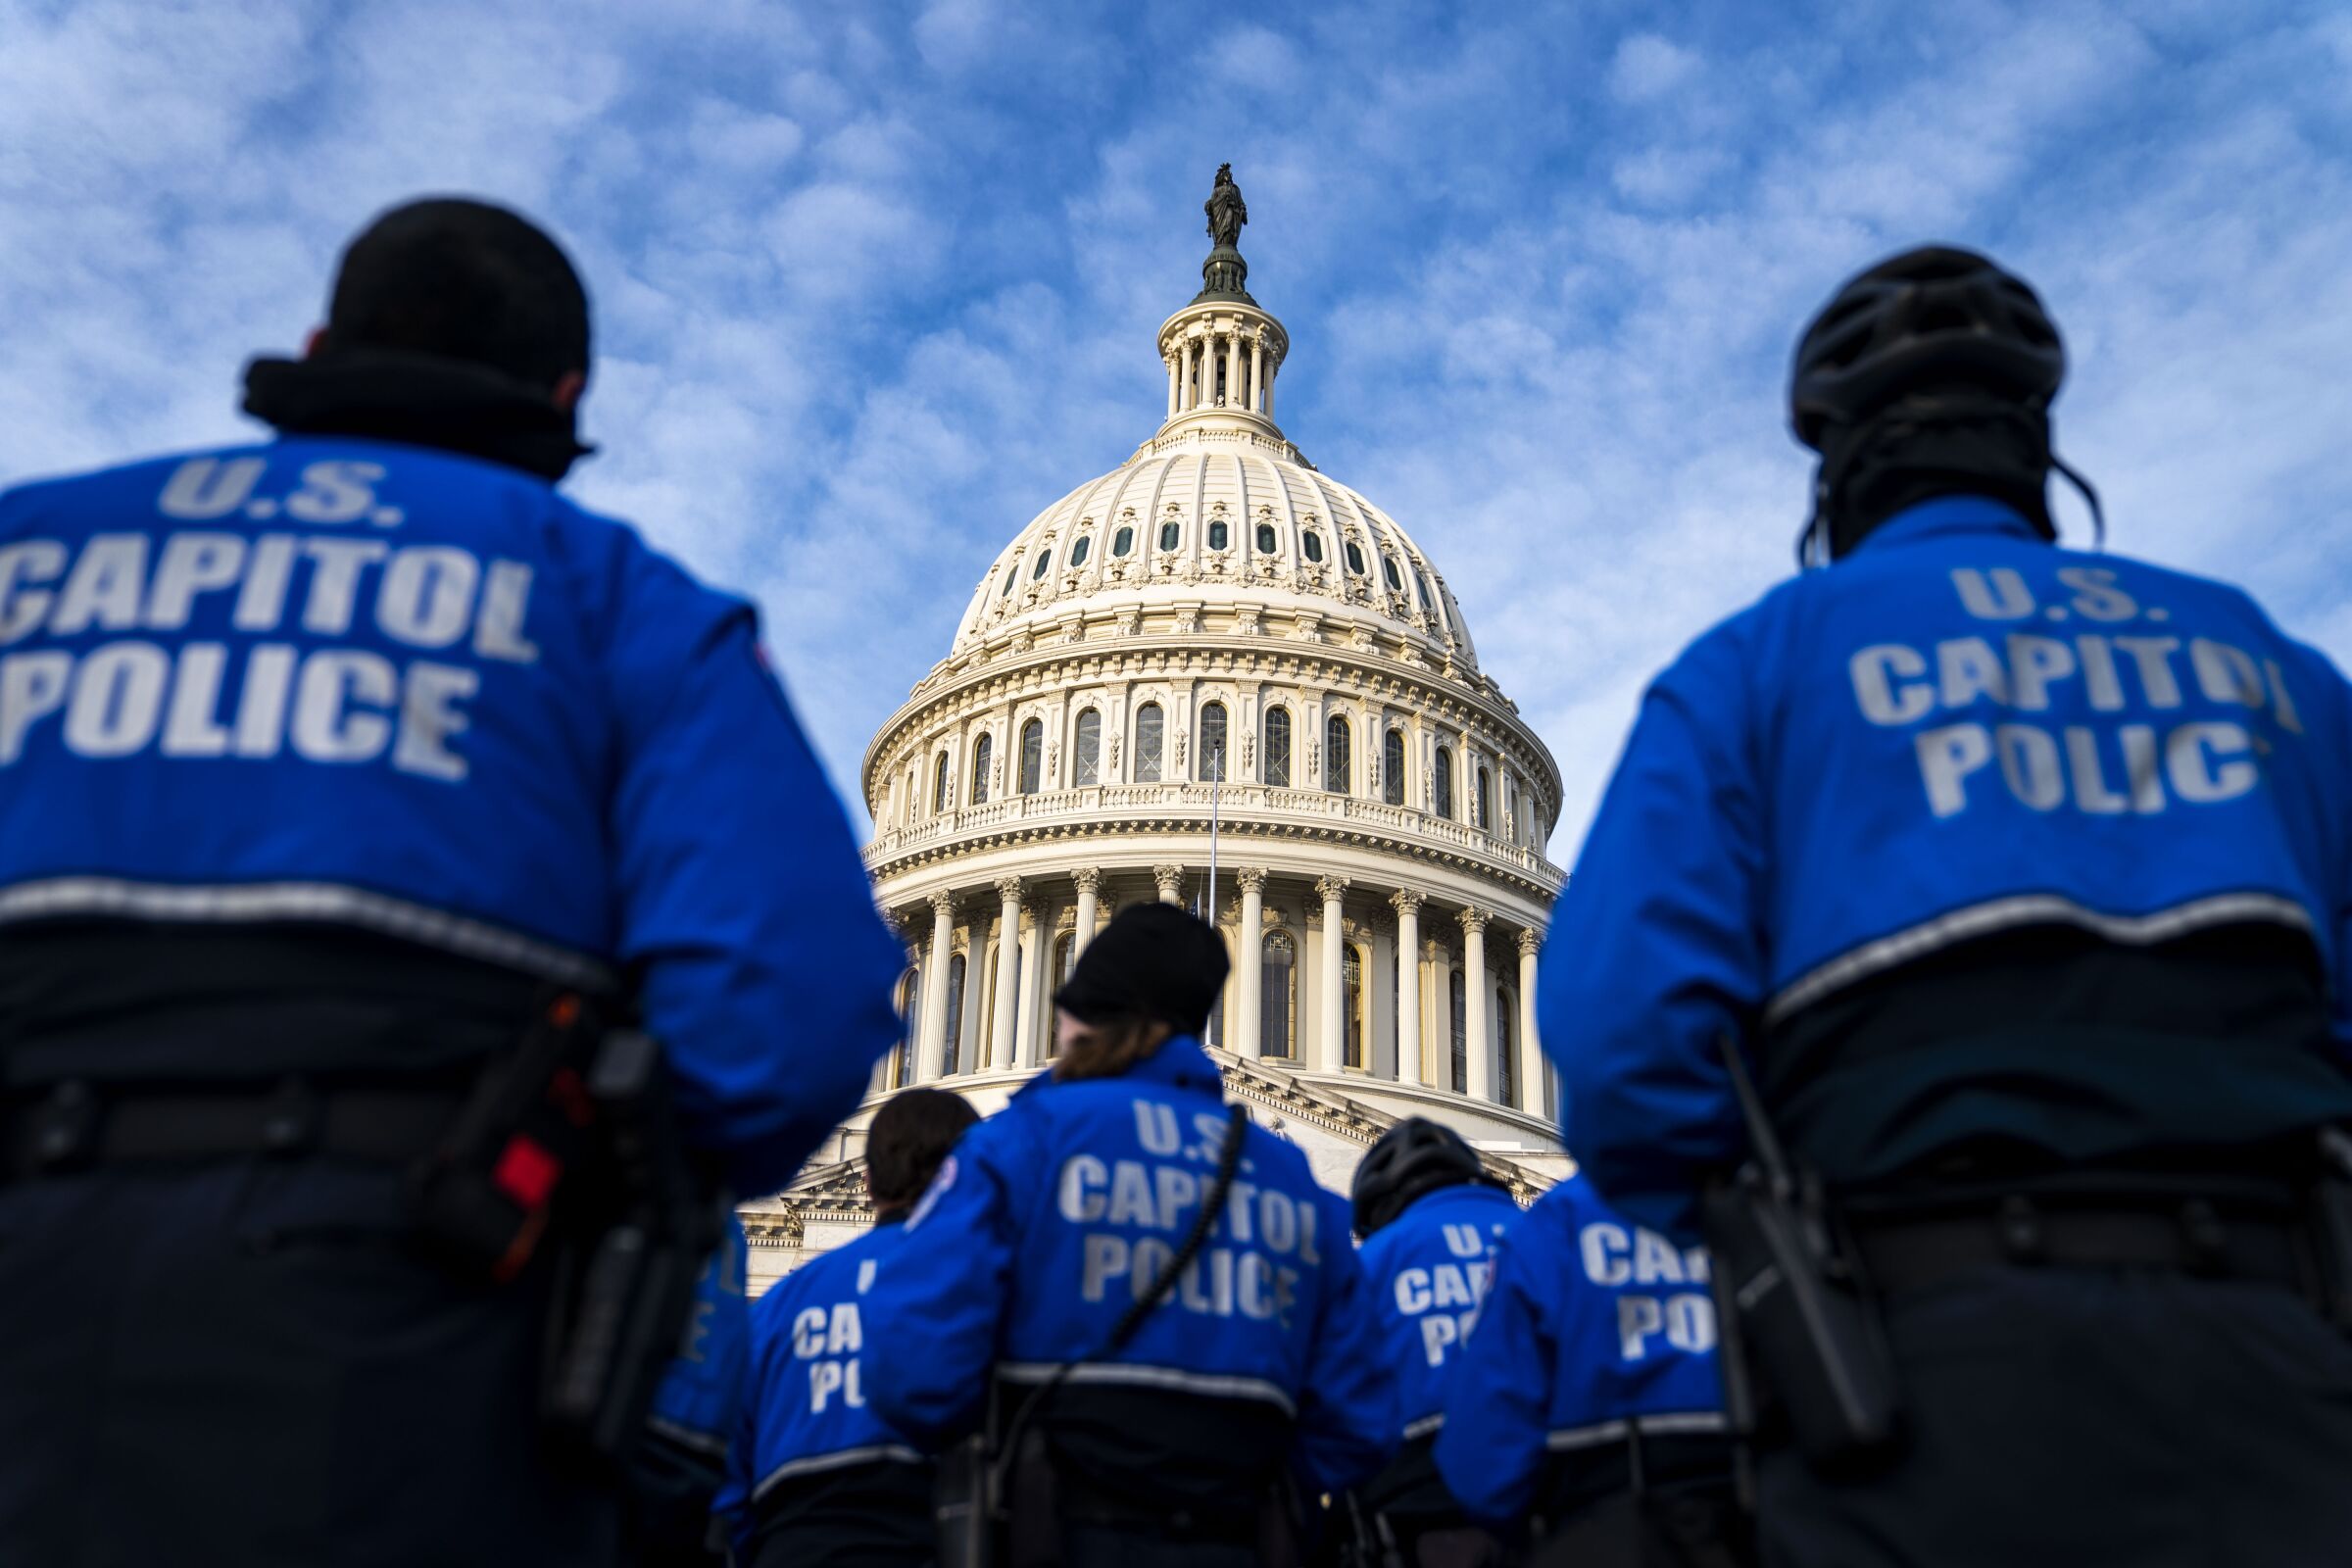 US Capitol Police Officers, one year after an insurrectionist mob stormed the Capitol